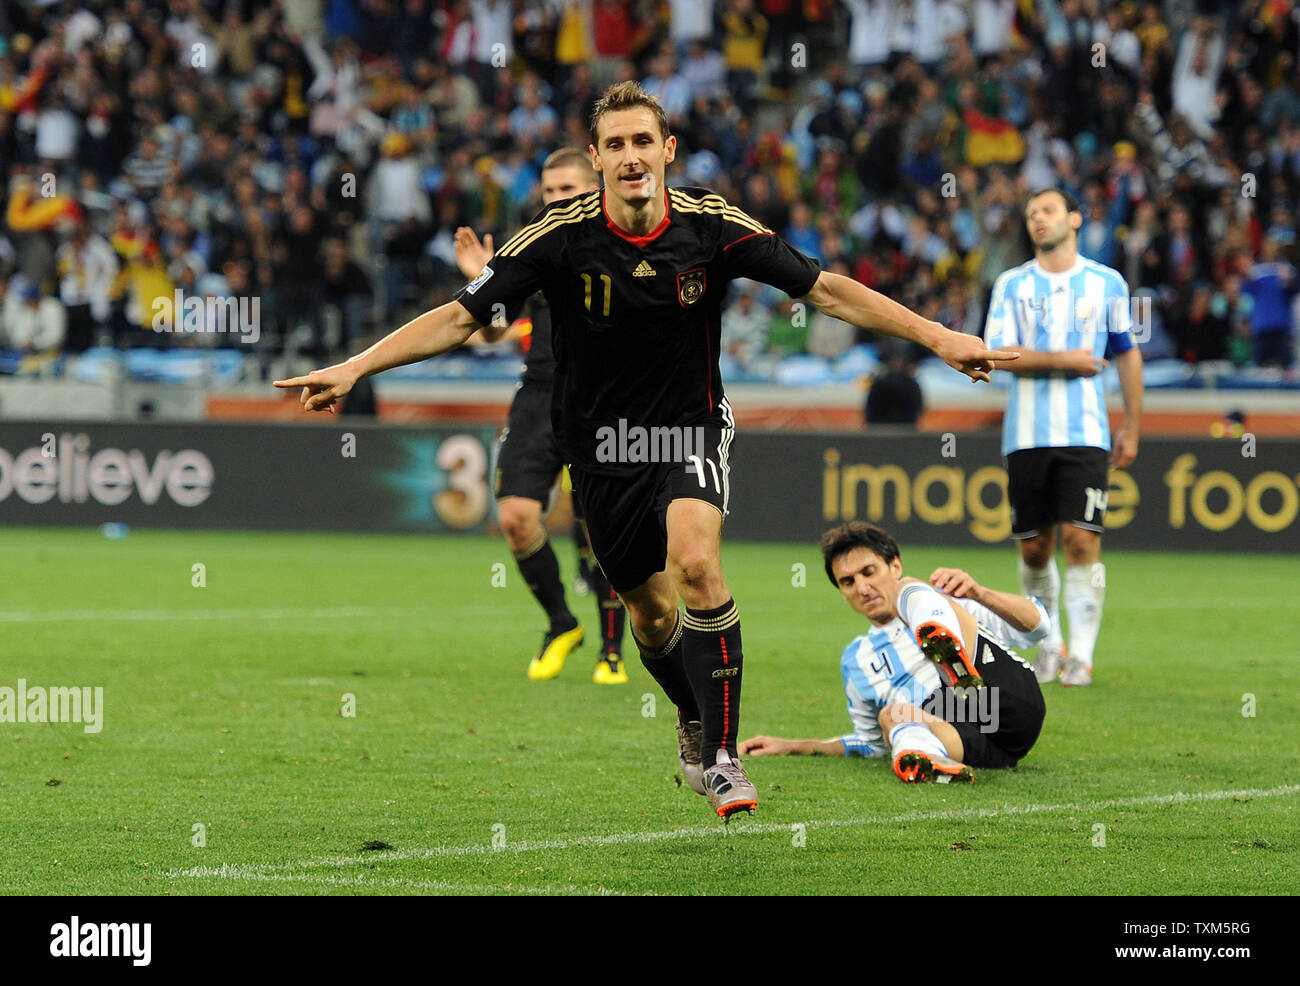 Miroslav Klose of Germany celebrates scoring his team's fourth goal during the FIFA World Cup Quarter Final match at the Green Point Stadium in Cape Town, South Africa on July 3, 2010. UPI/Chris Brunskill Stock Photo